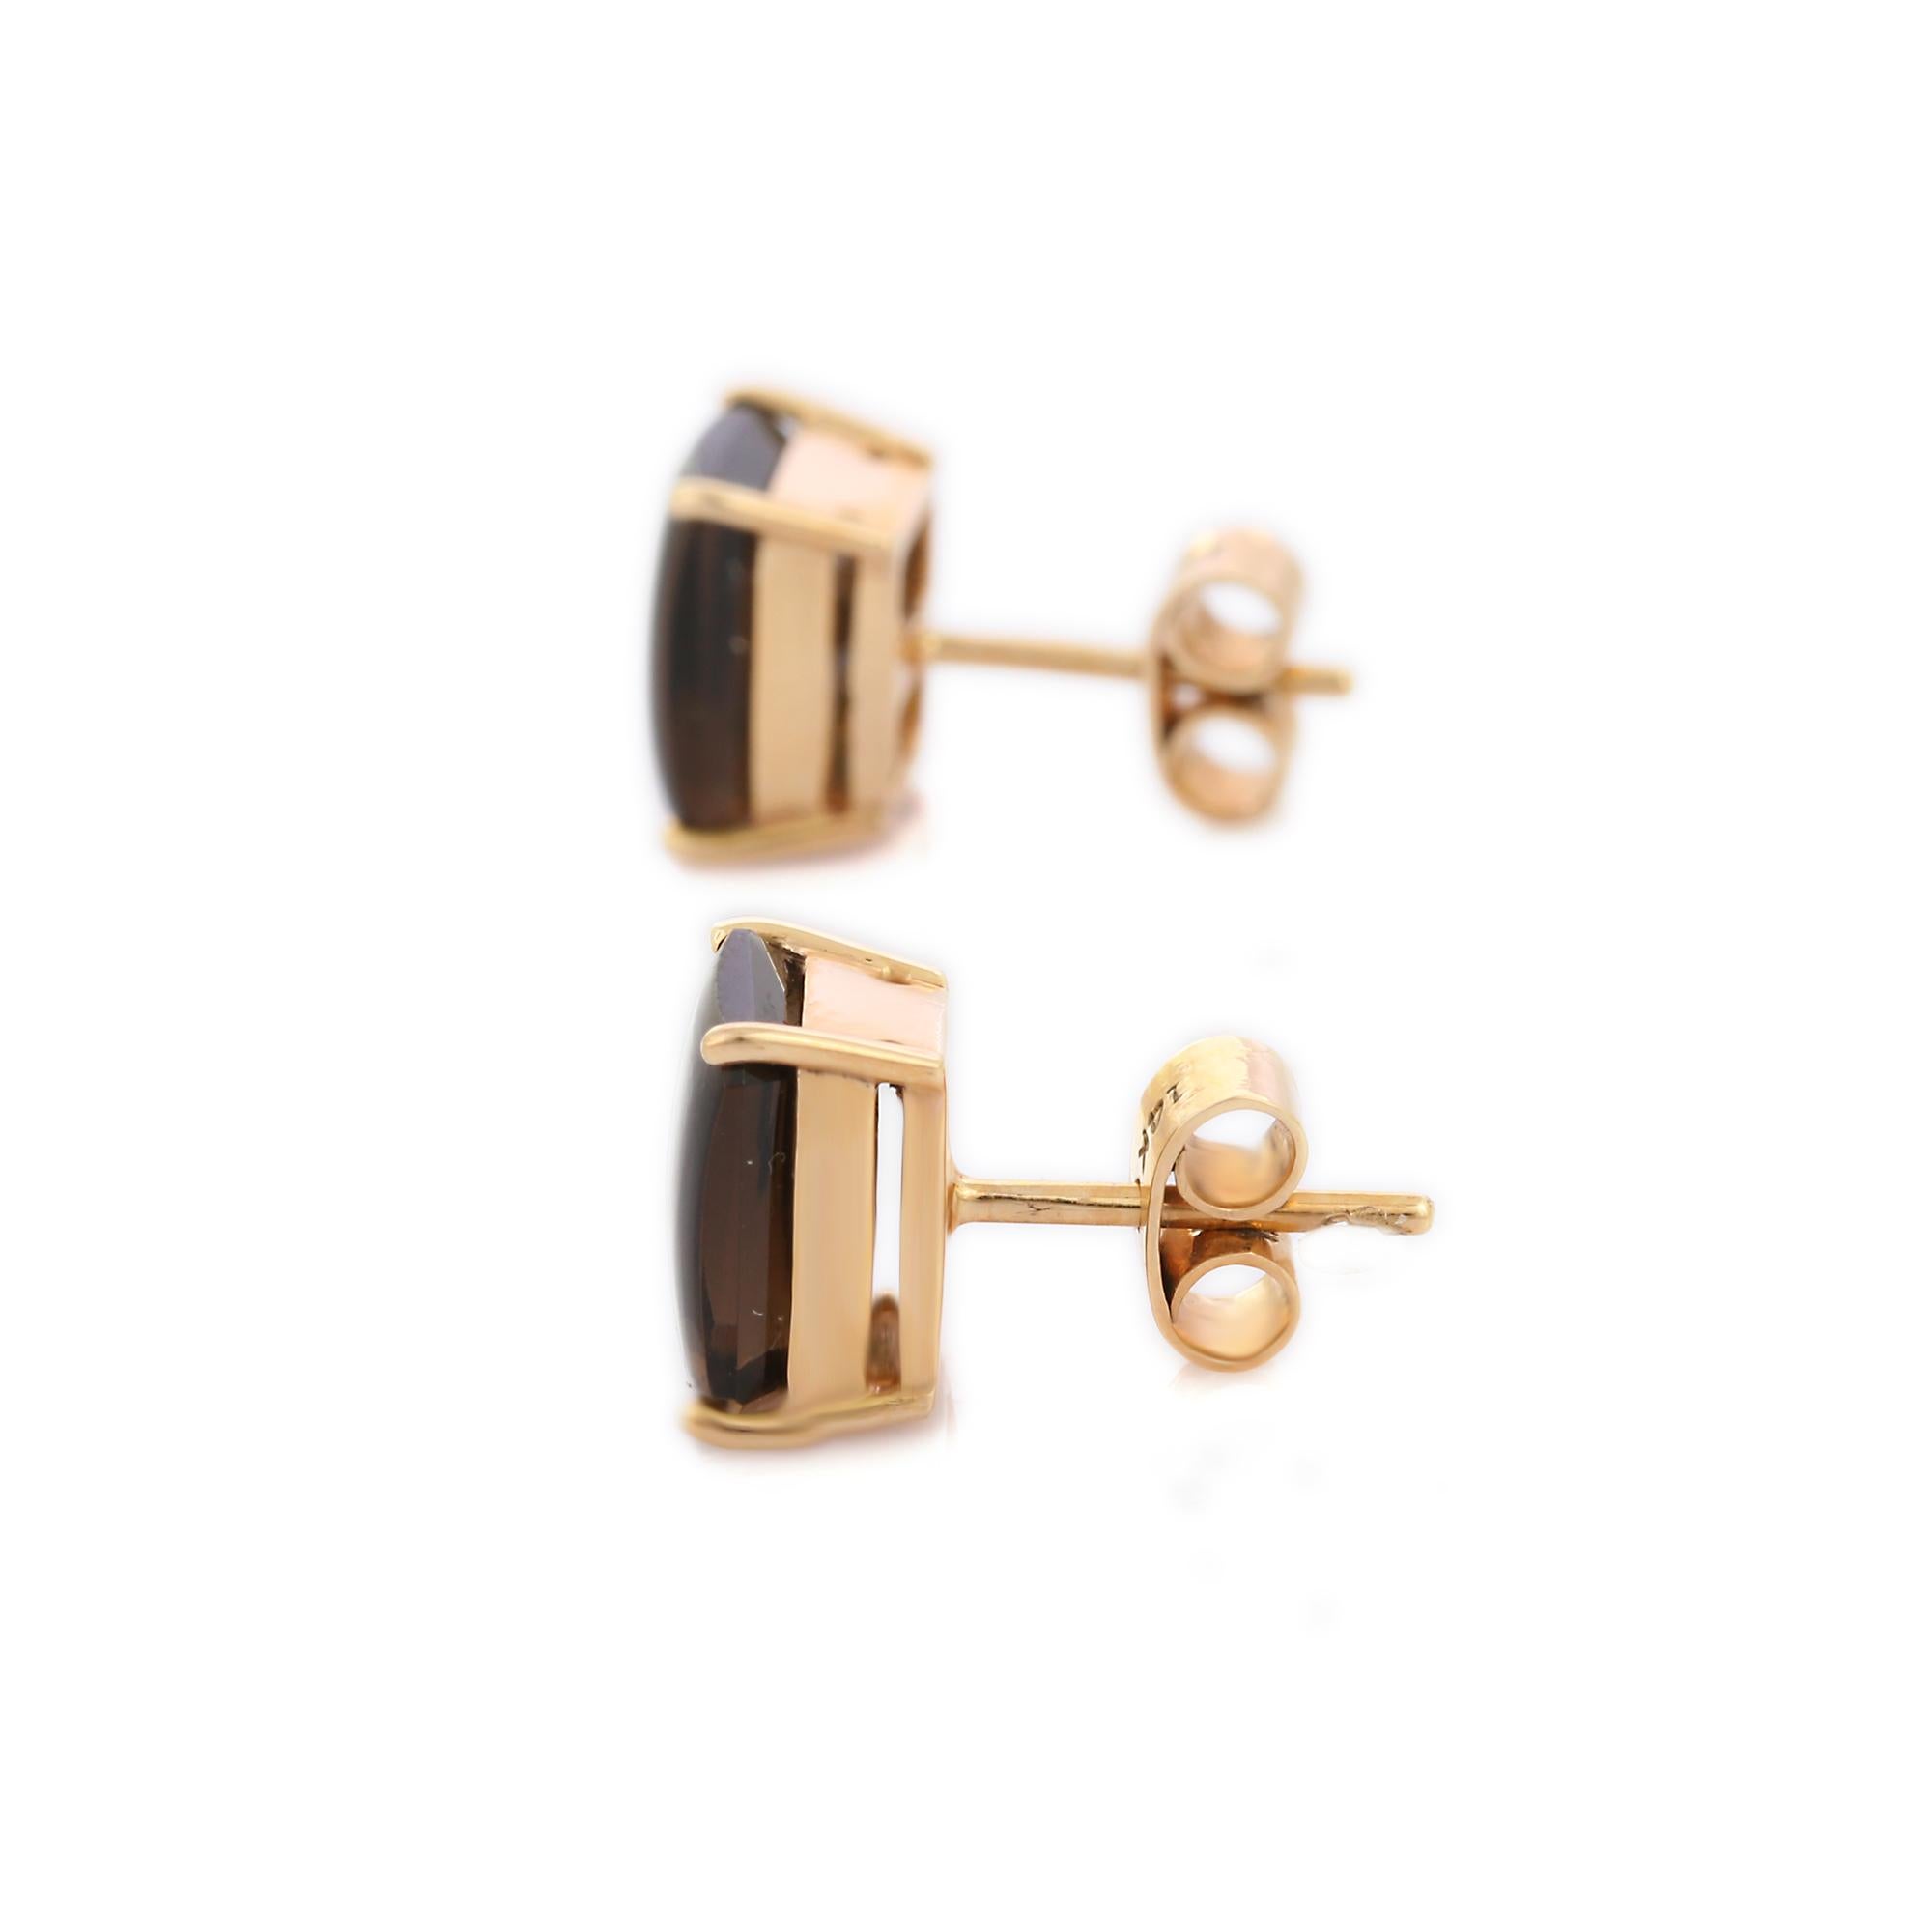 Studs create a subtle beauty while showcasing the colors of the natural precious gemstones.

Octagon cut brown smoky quartz studs in 14K gold. Embrace your look with these minimal stunning pair of earrings suitable for any occasion to complete your